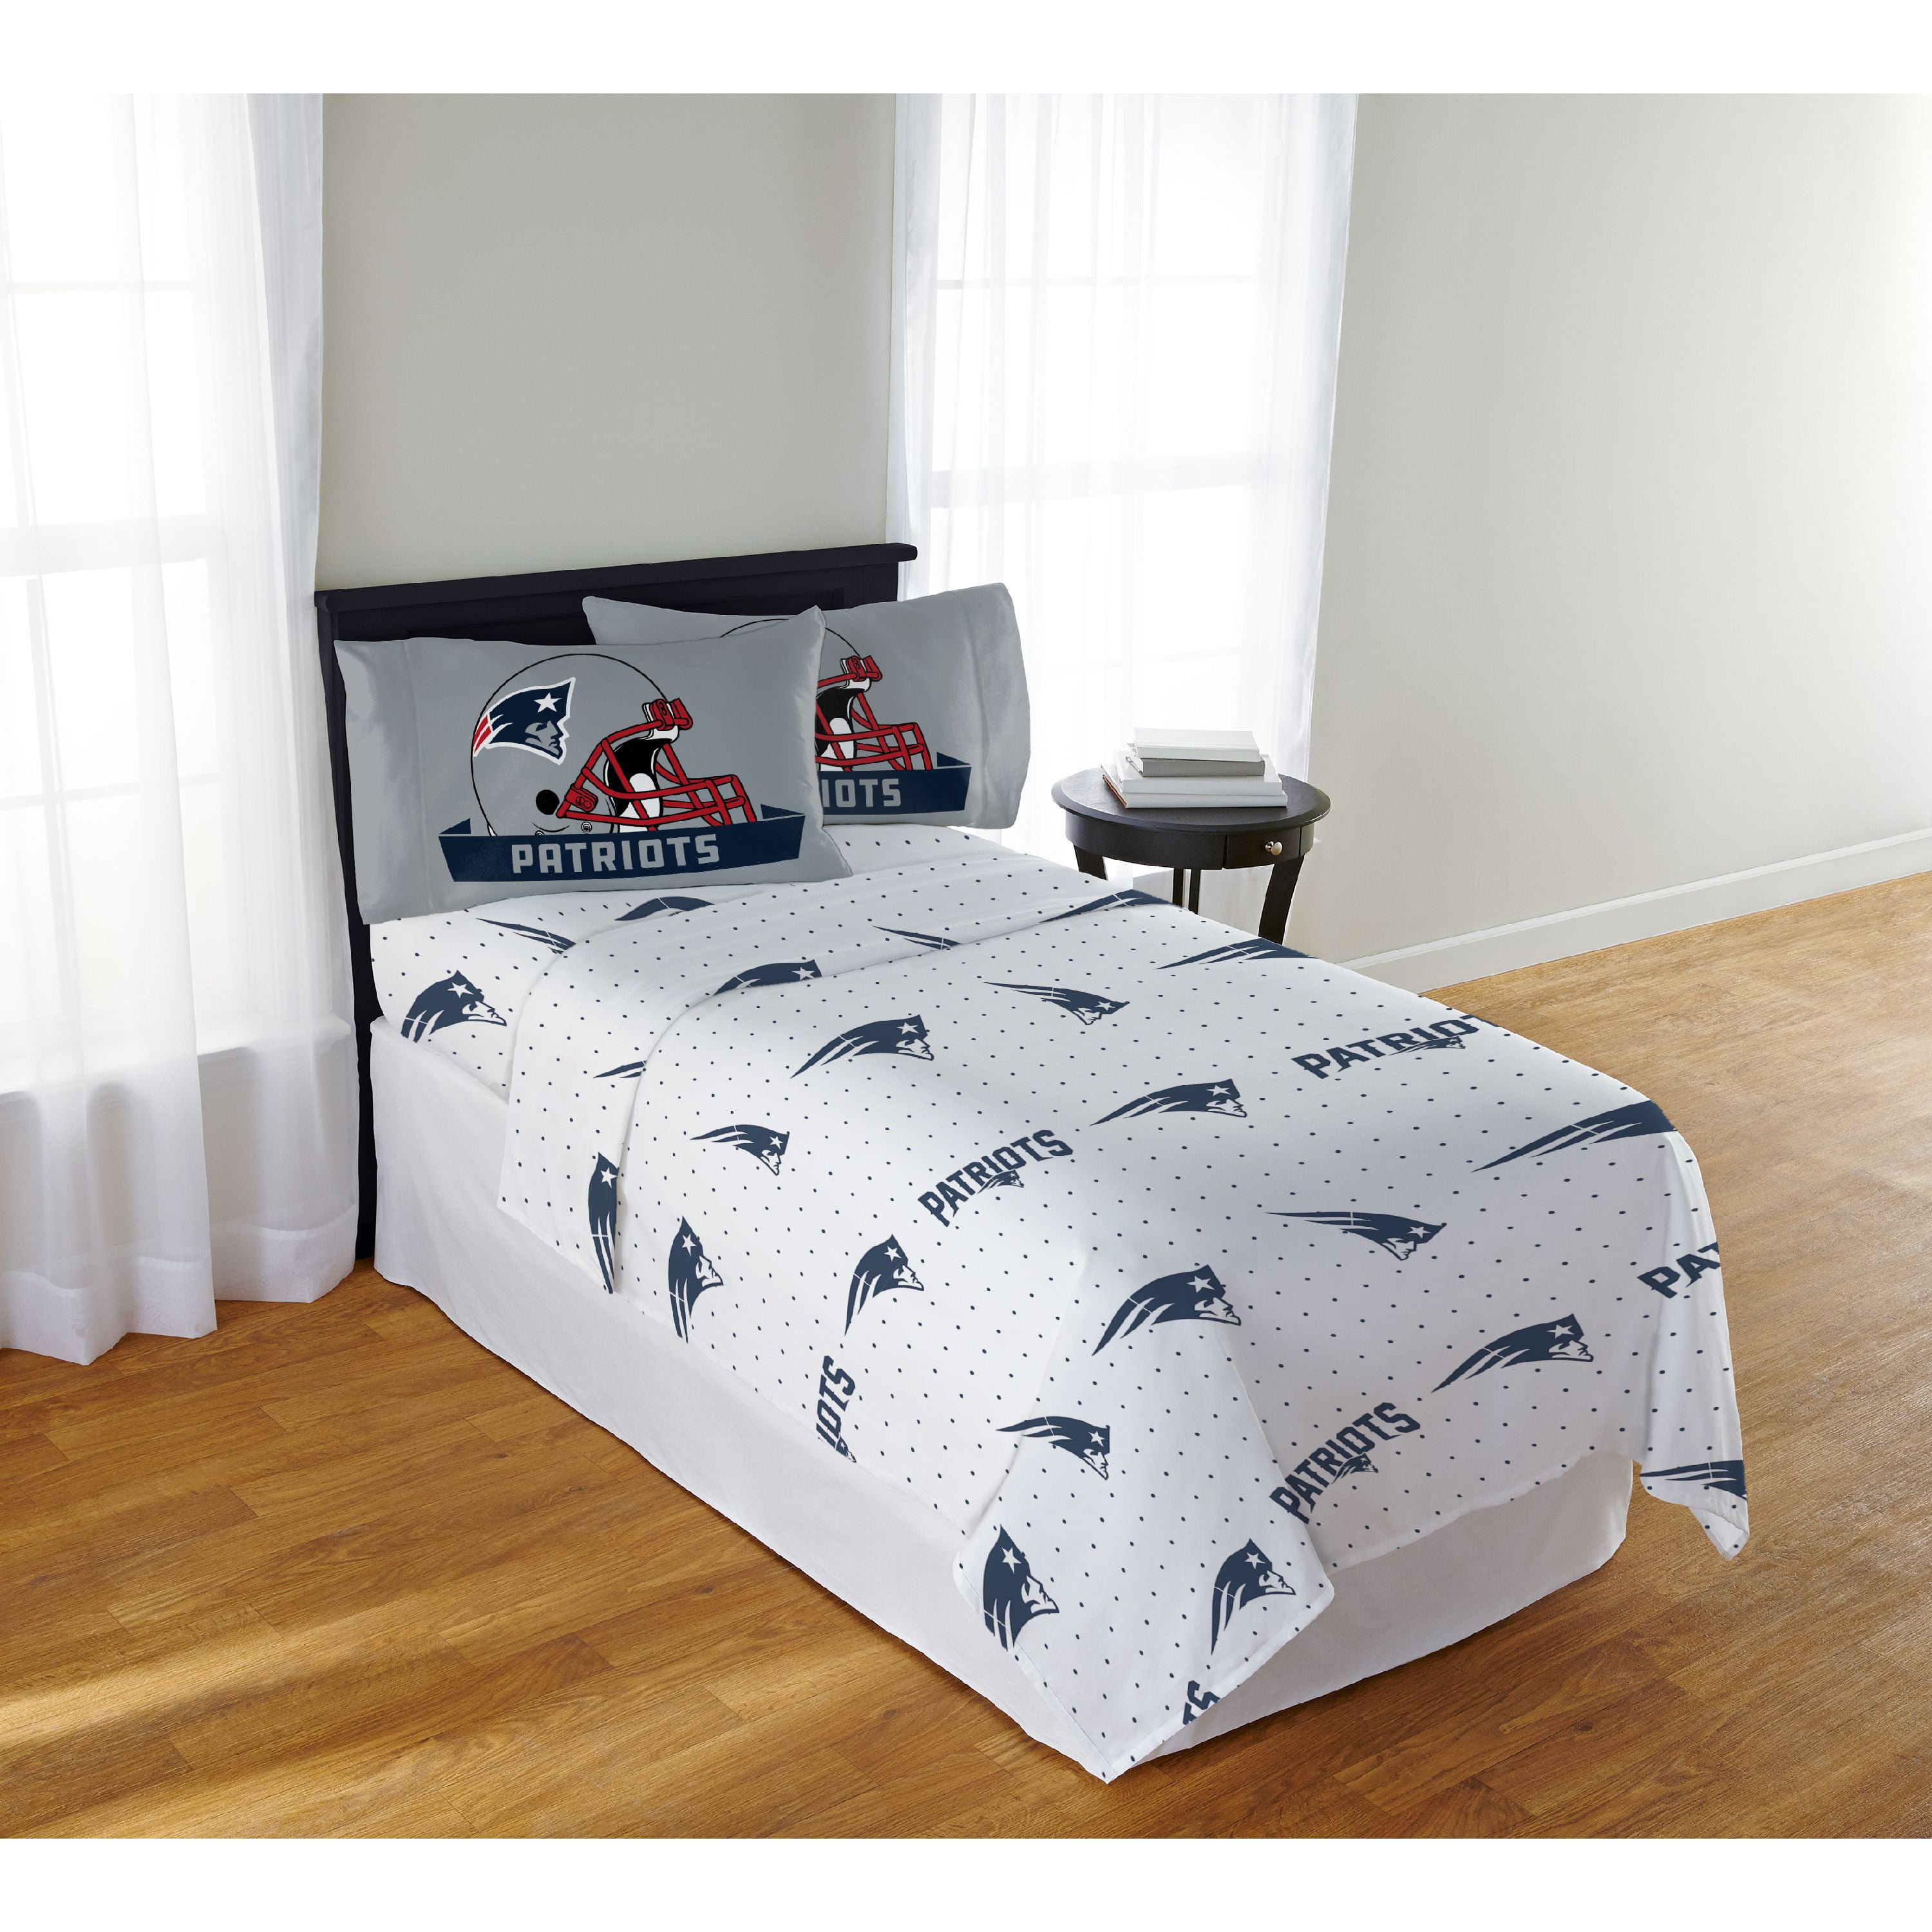 New England Patriots Sheet Set Nfl Queen Bed Fitted Flat Sheets Boys Team Beddin 190604061658 Ebay